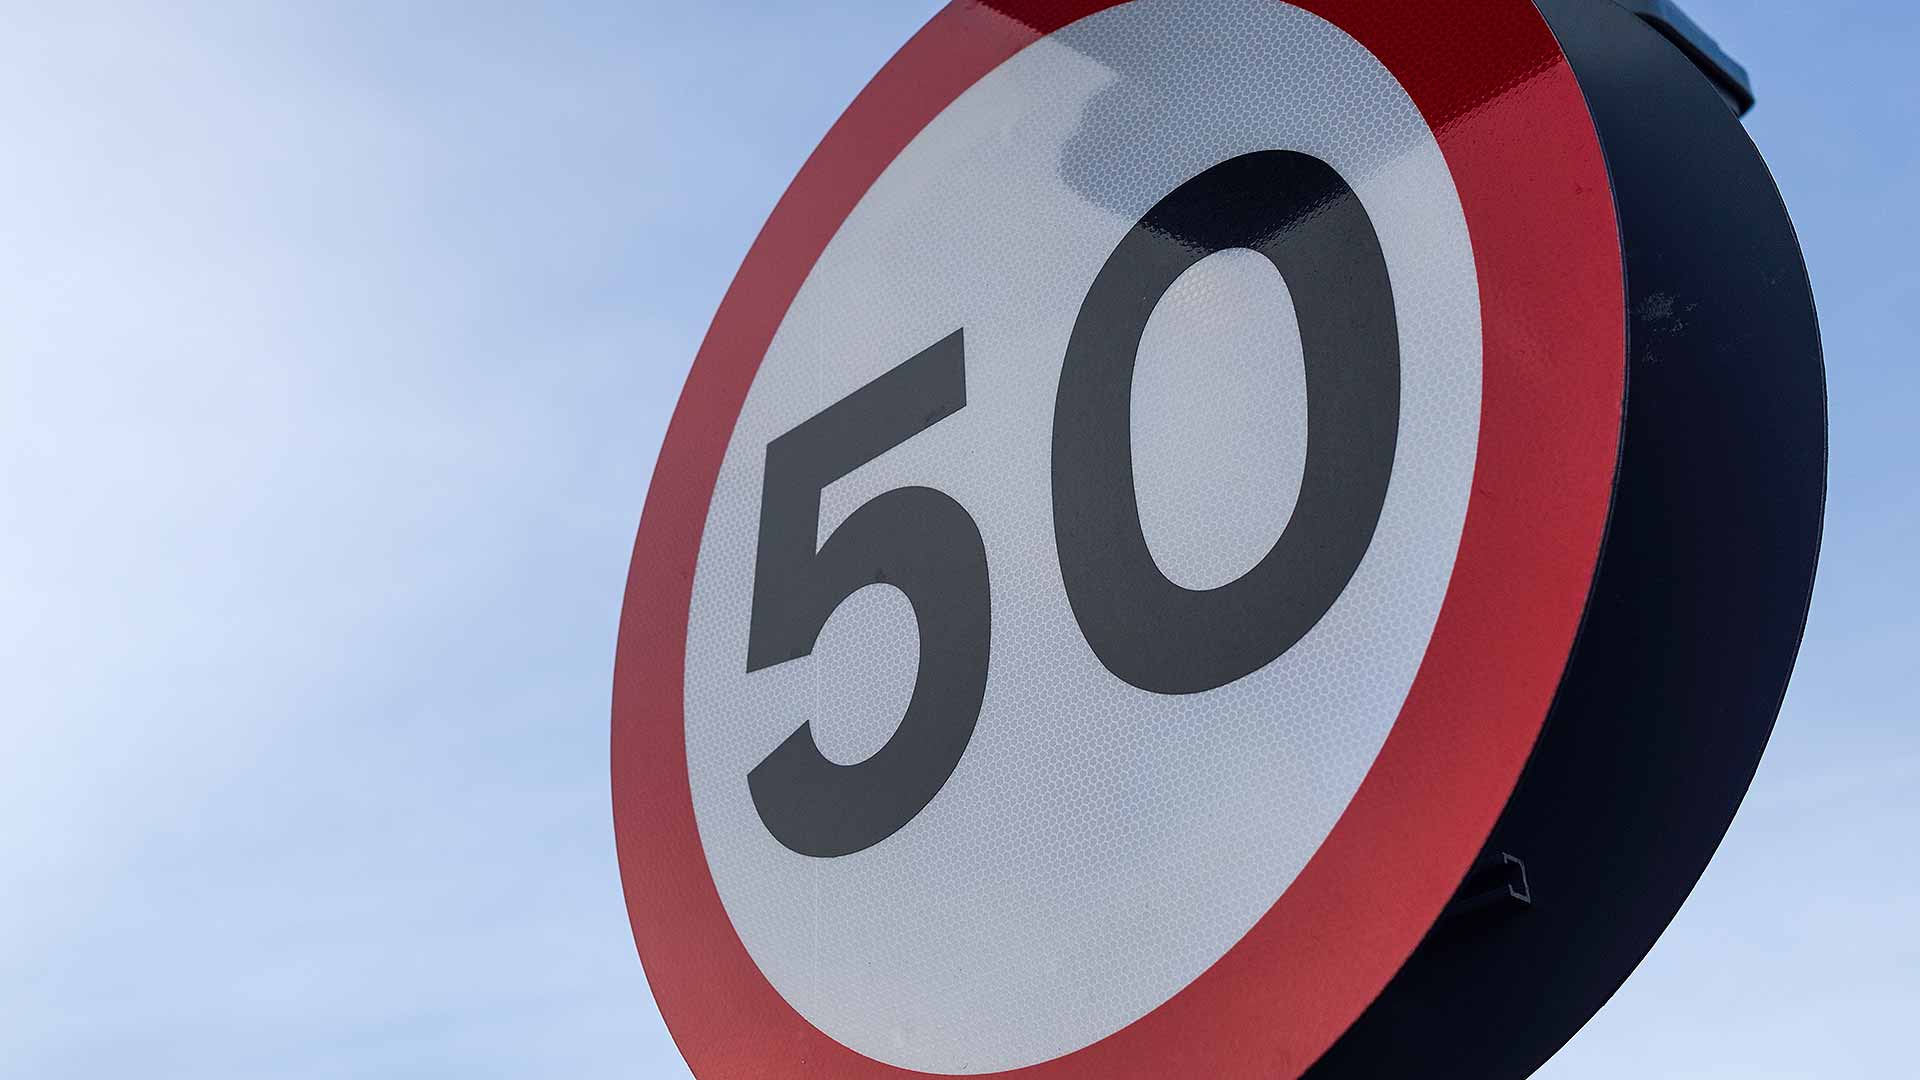 50mph speed limit sign